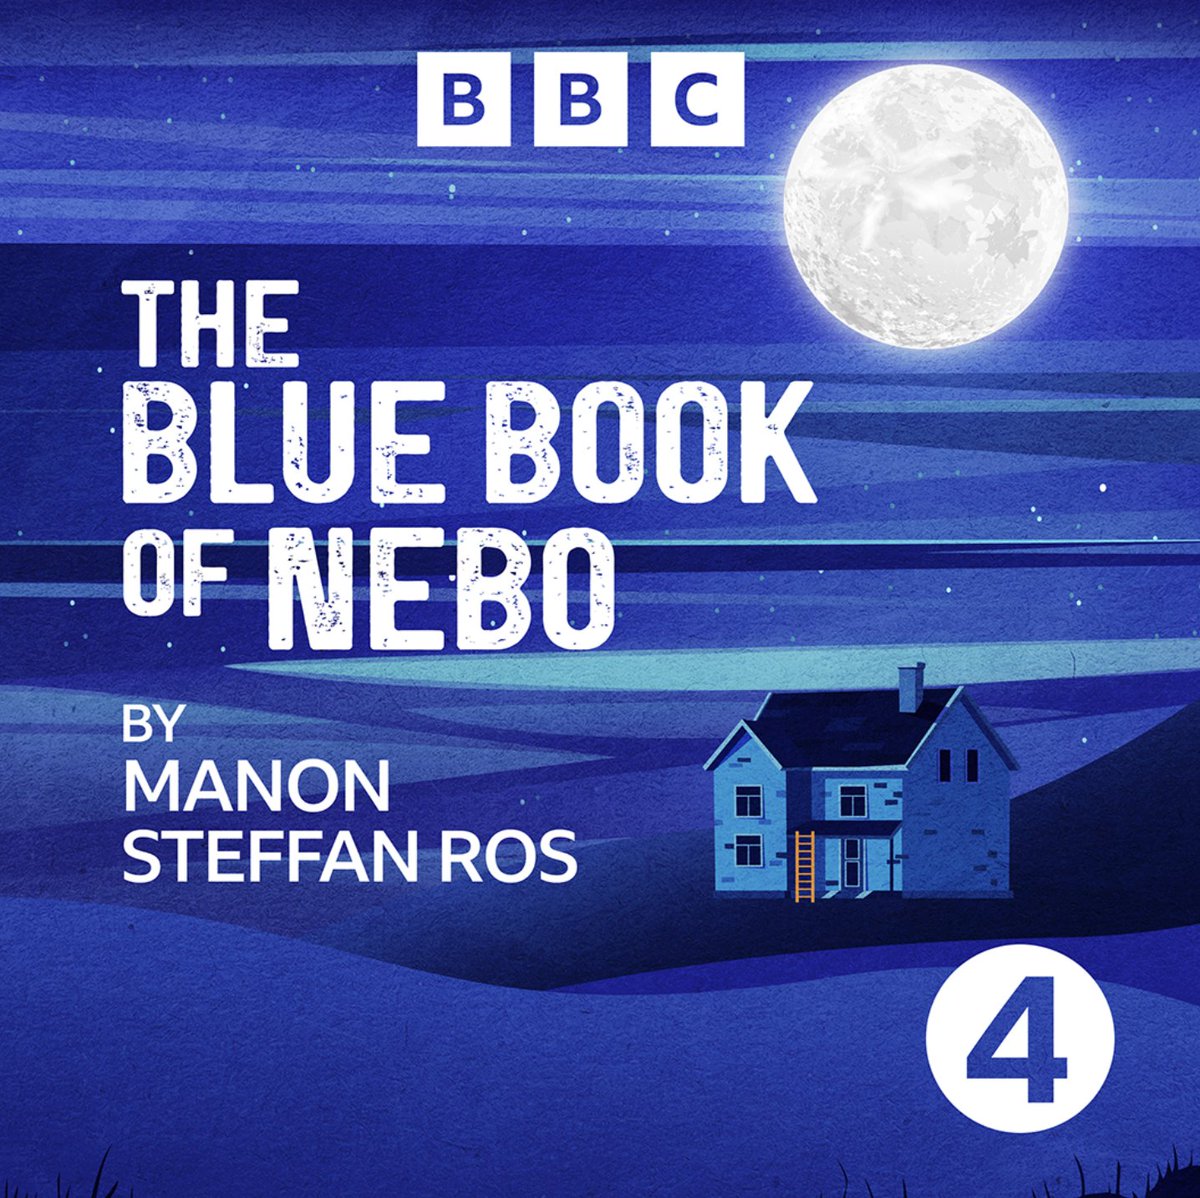 The Blue Book of Nebo now on @bbcsounds!💙 Listen here: bbc.co.uk/sounds/series/…